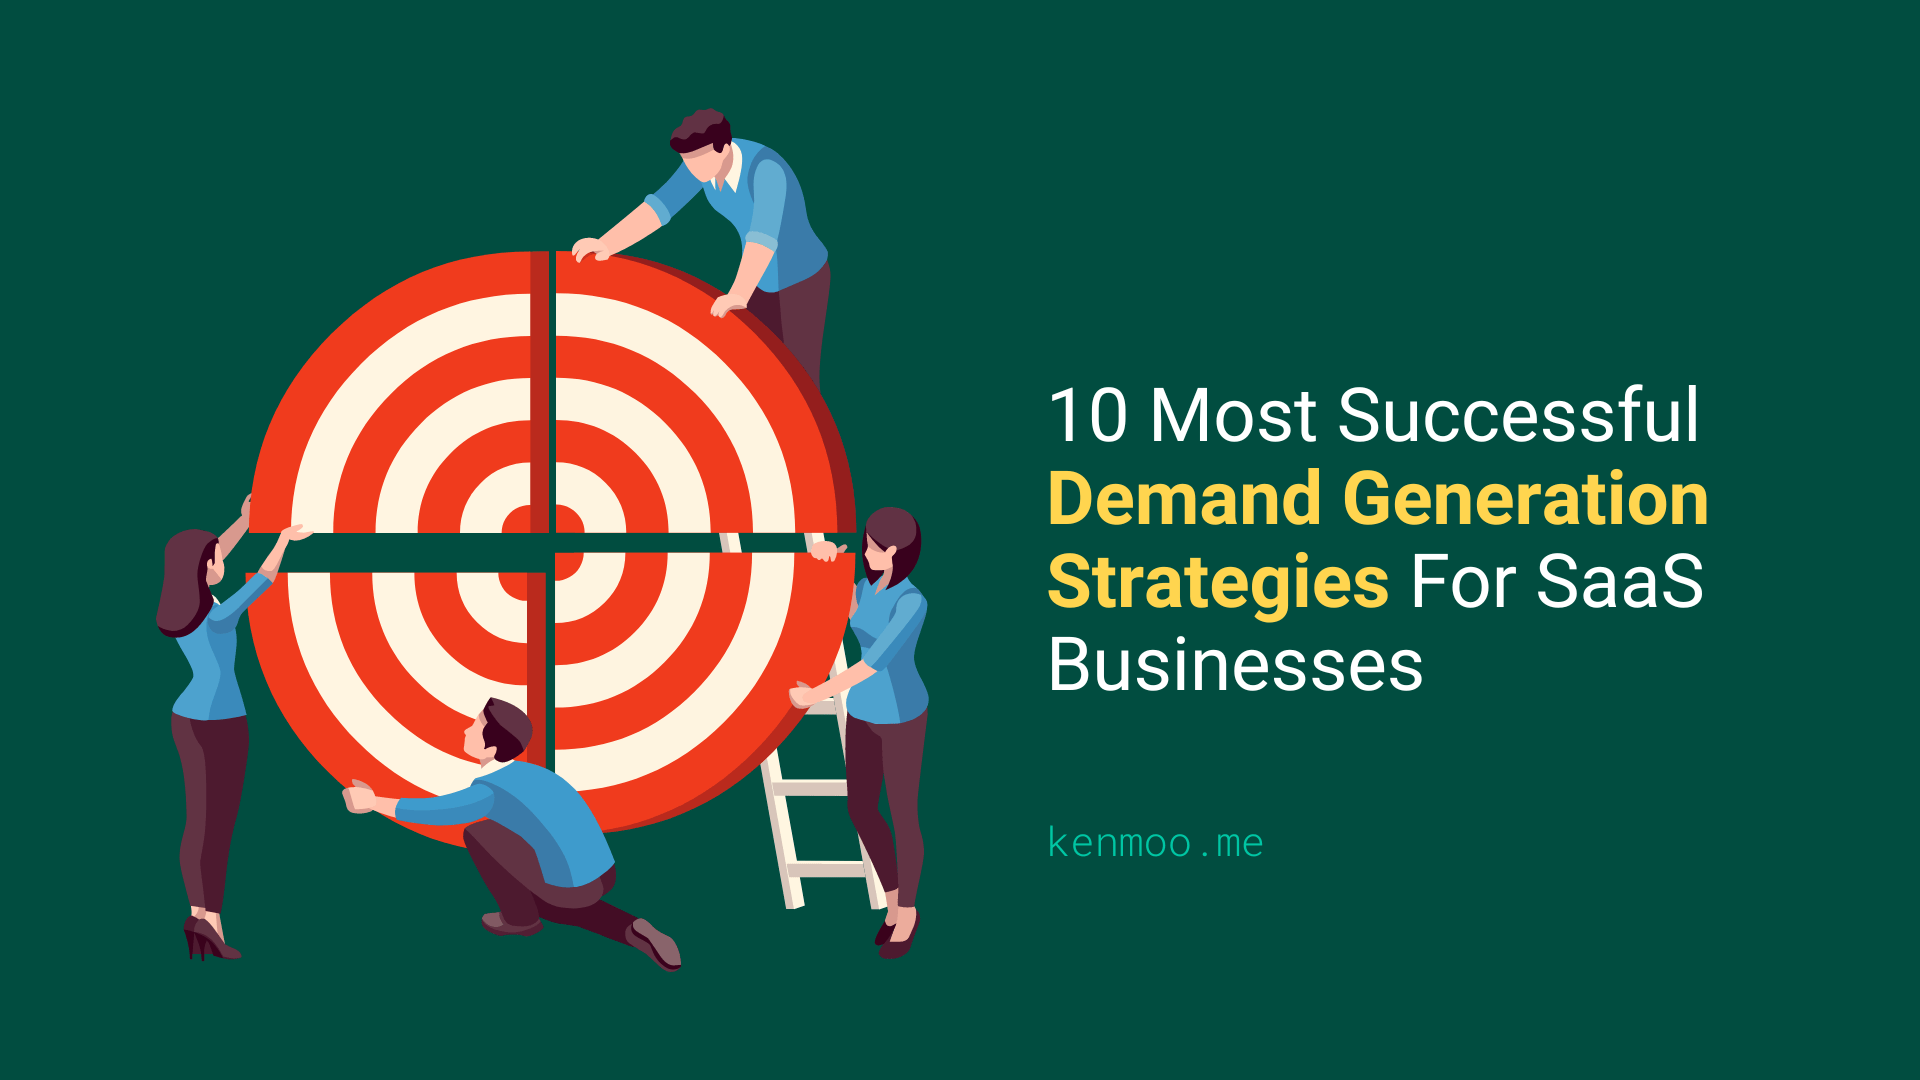 10 Successful Demand Generation Strategies For SaaS Businesses